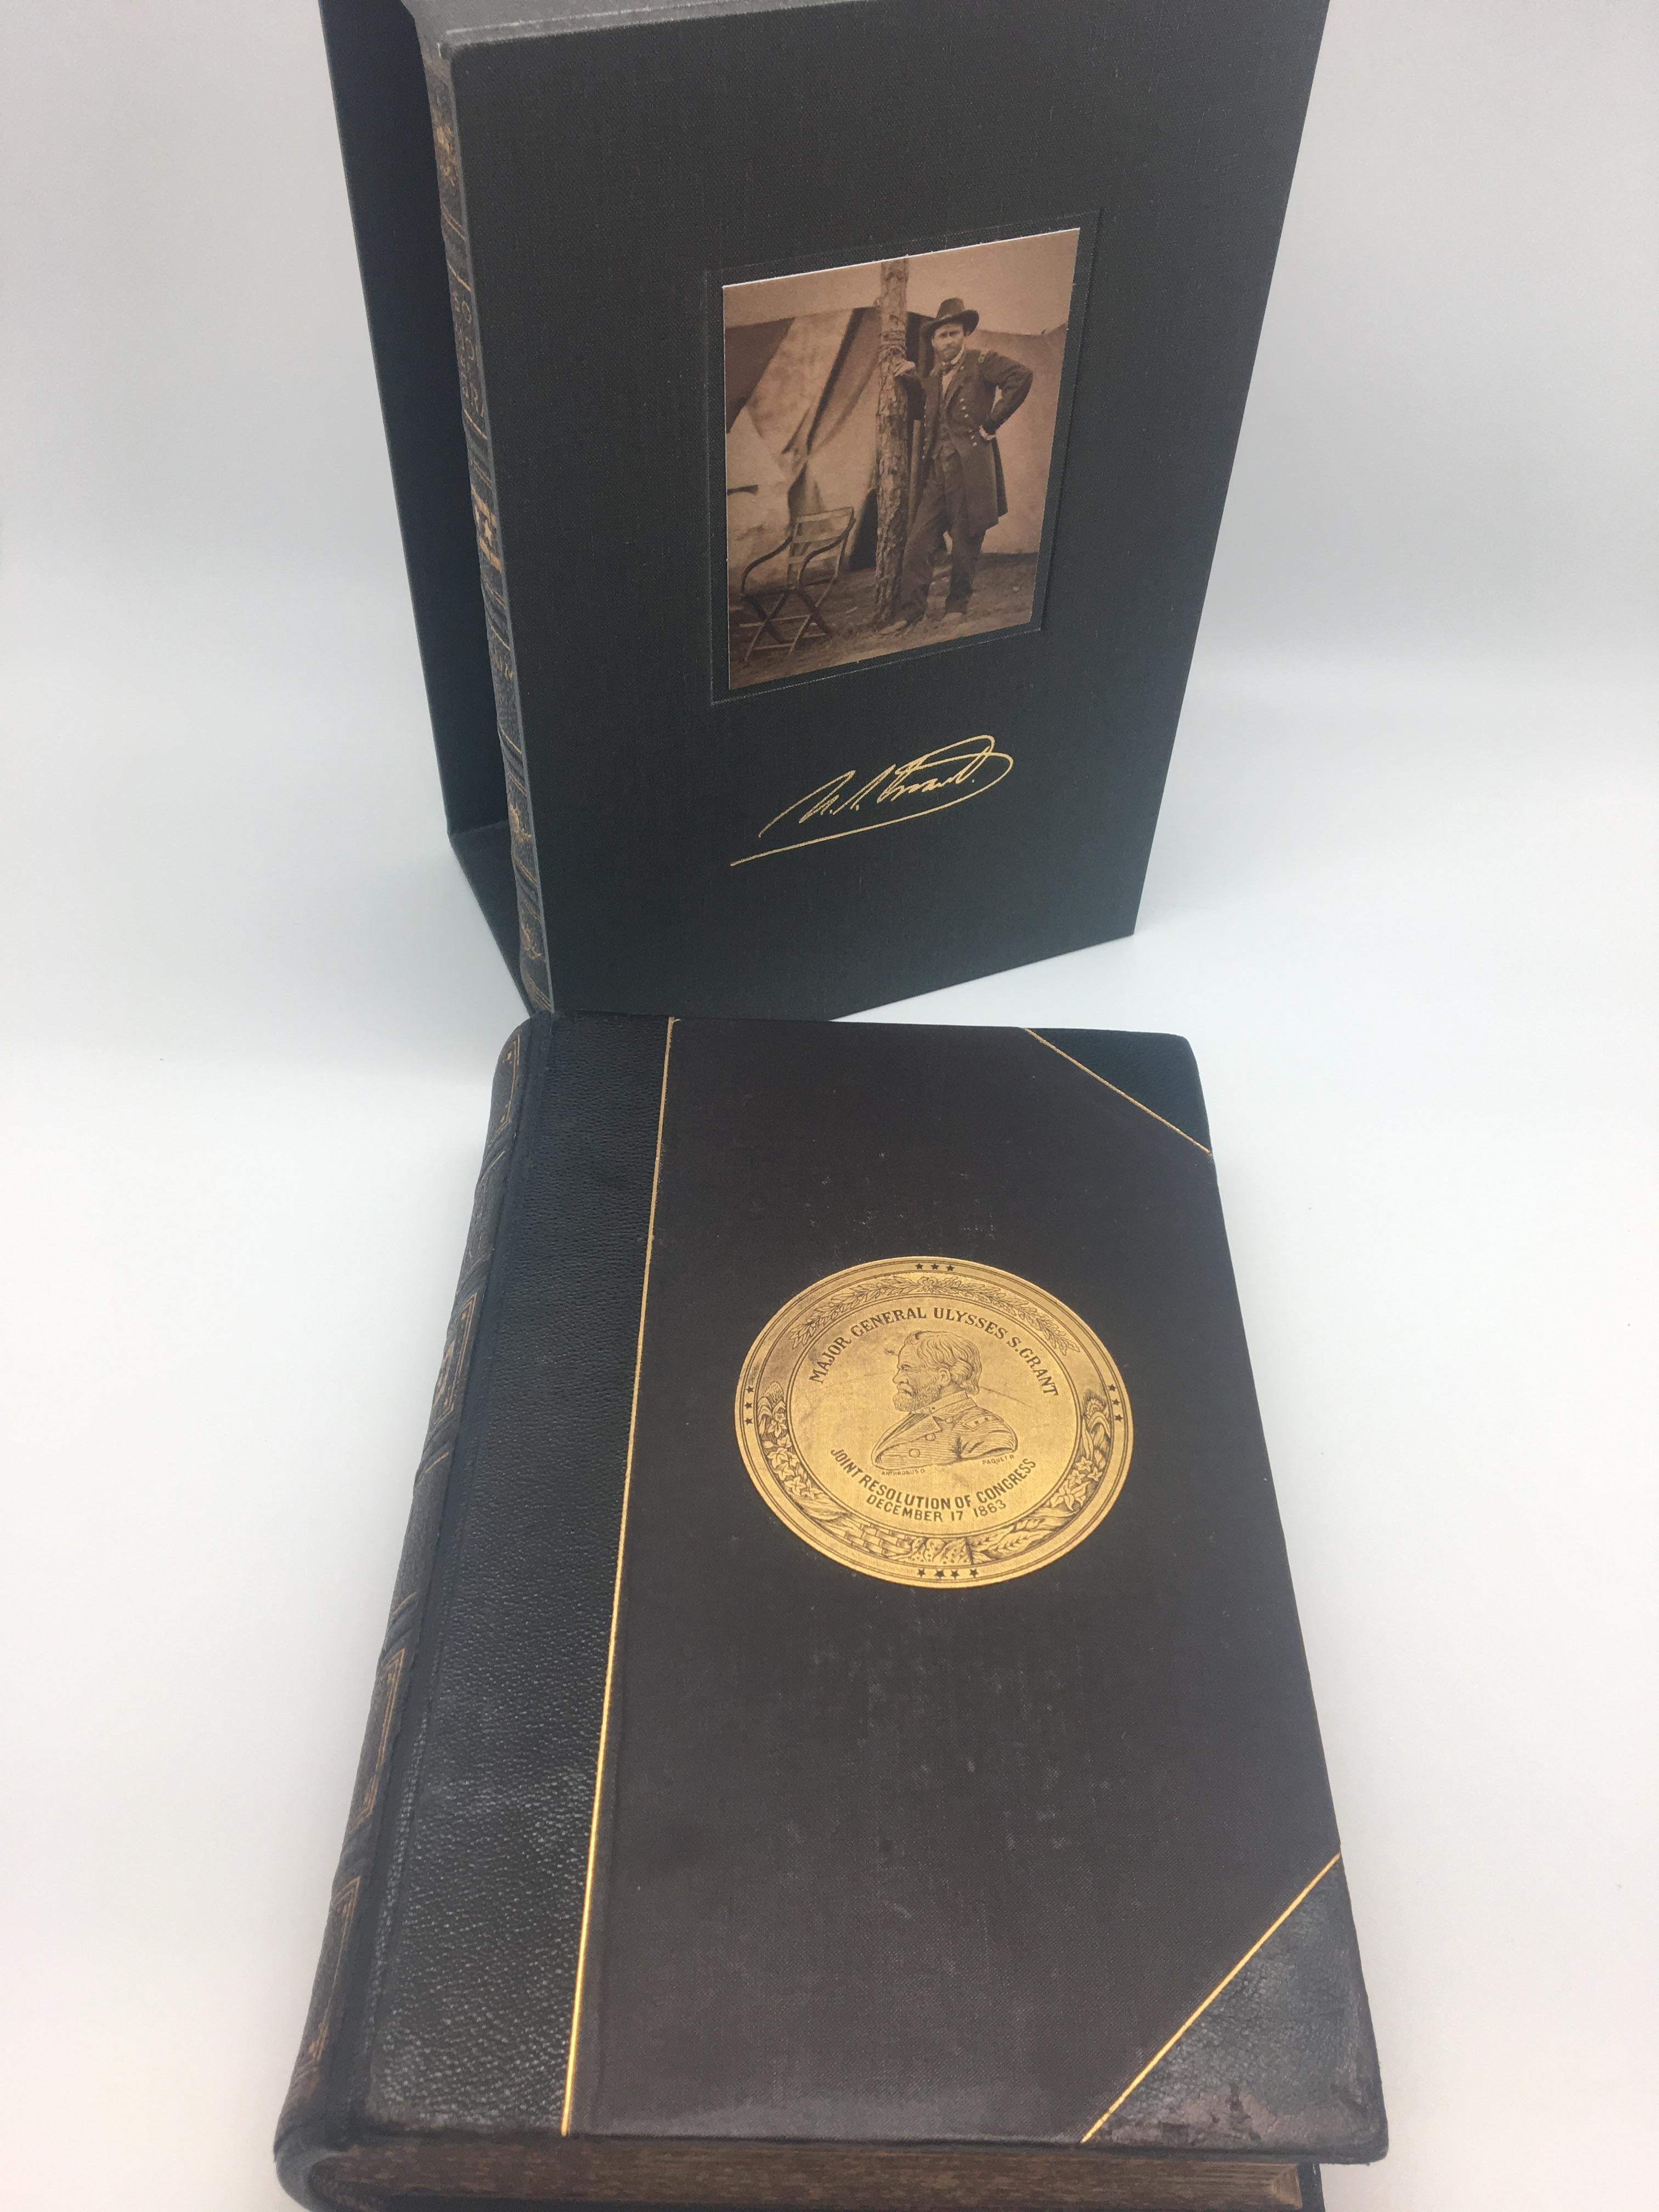 ulysses s grant memoirs first edition